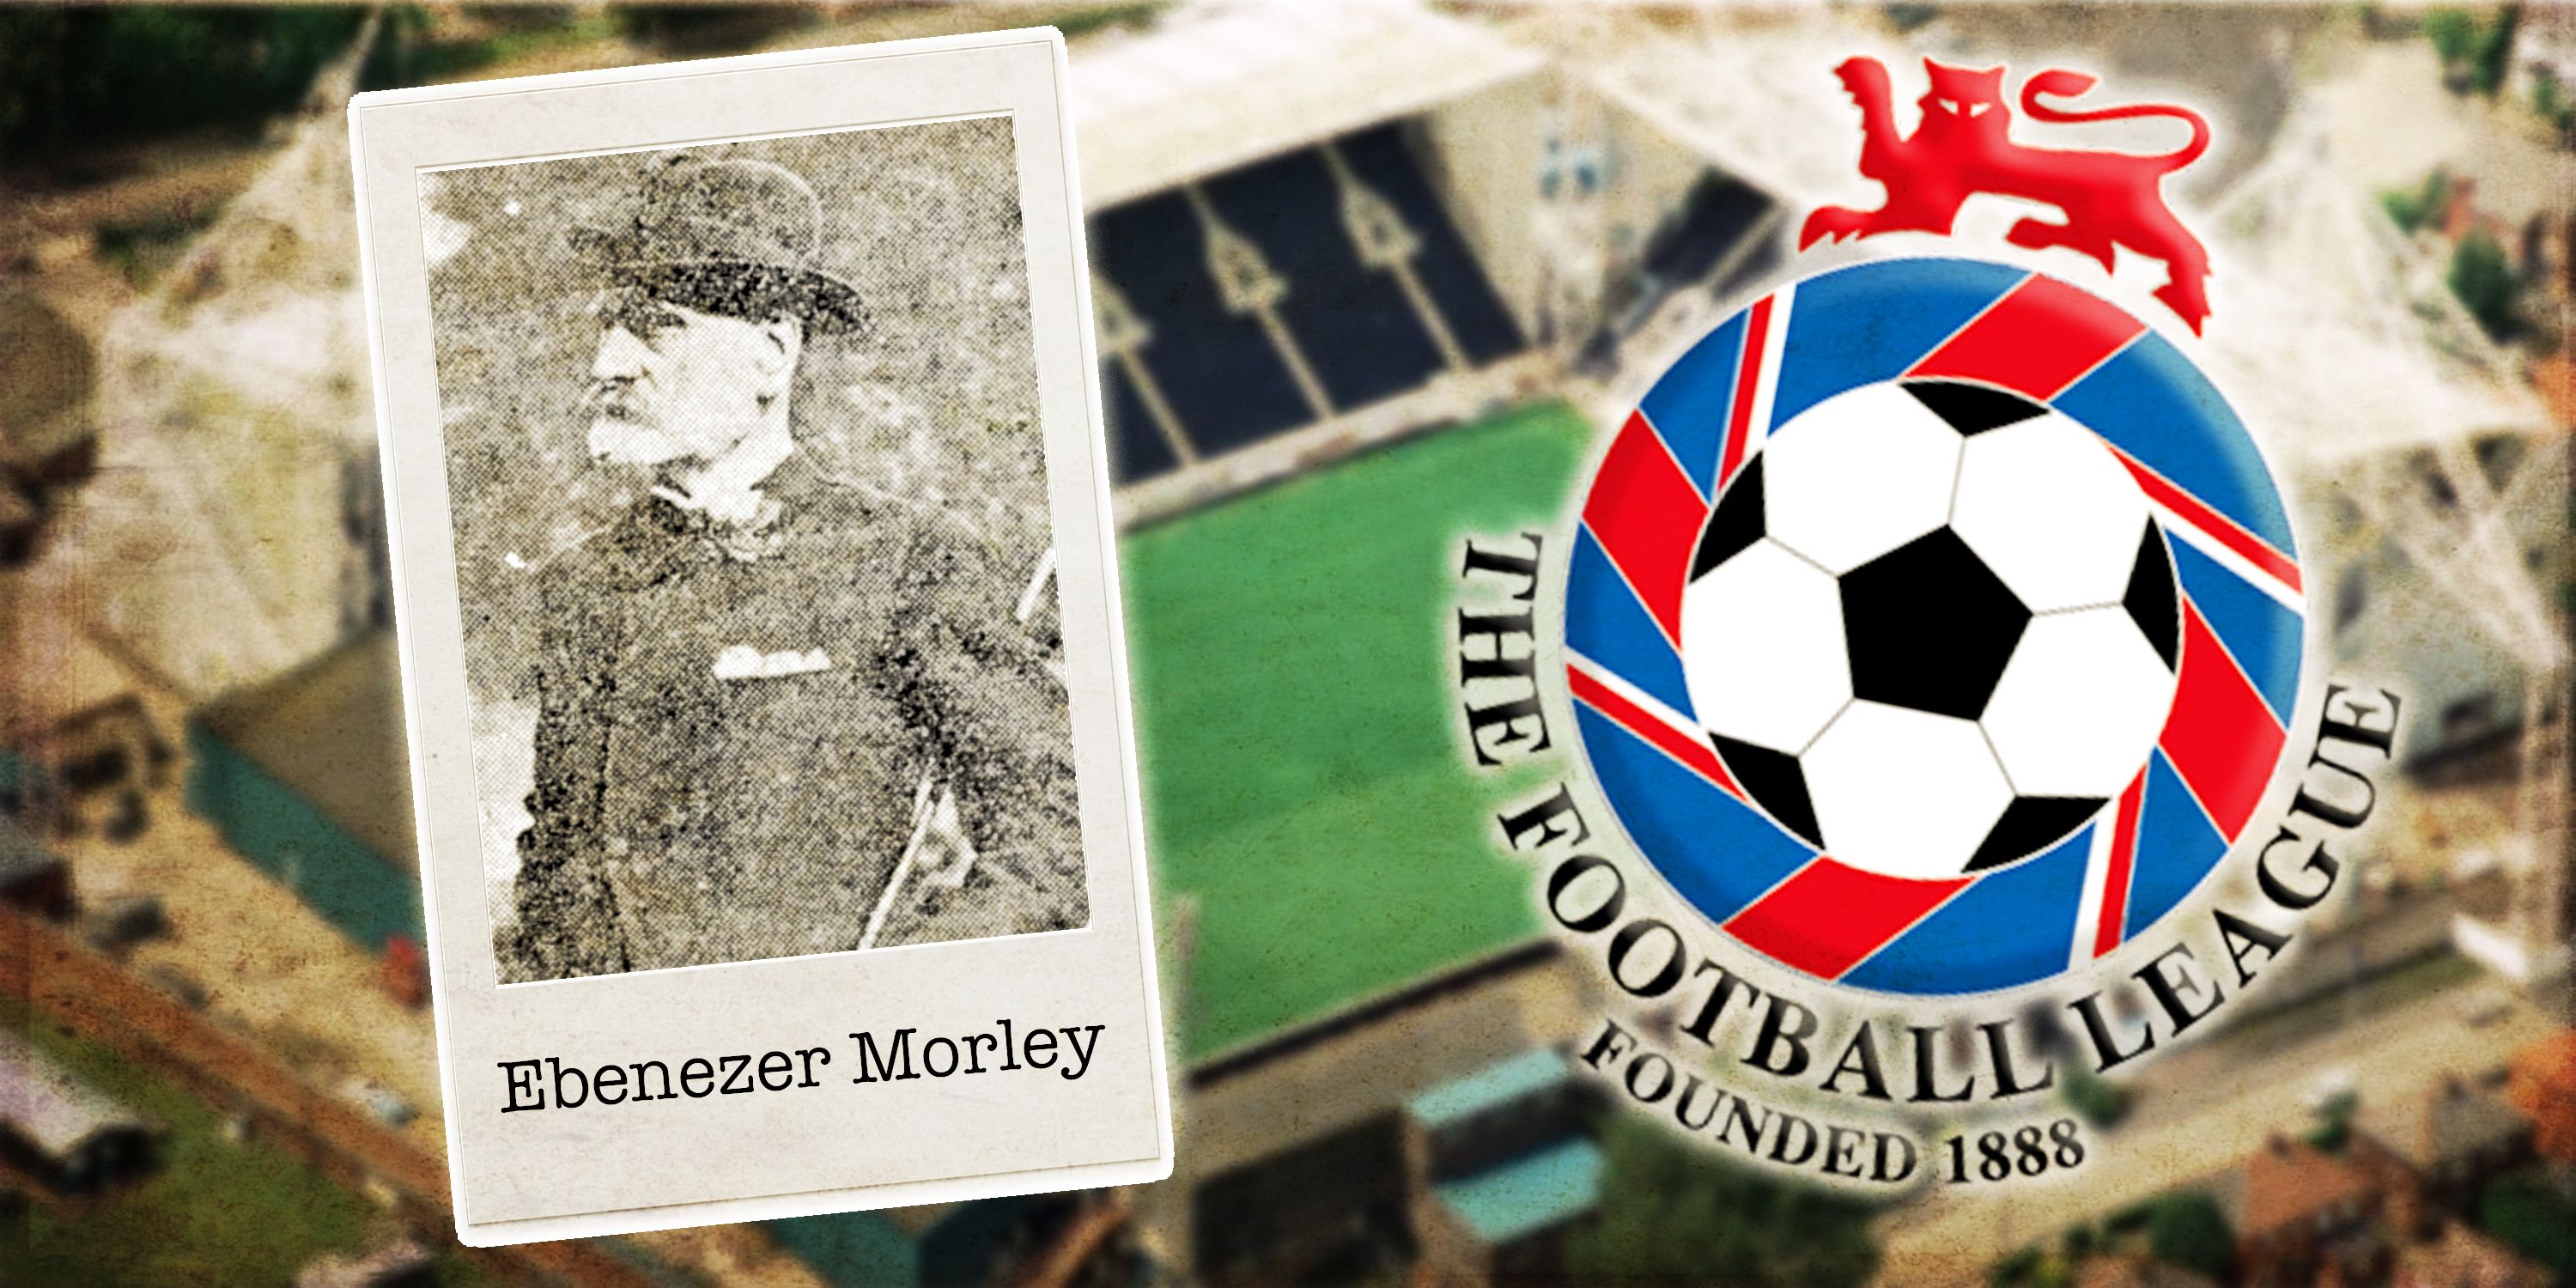 A black and white photograph of Ebenezer Morley with the Football League logo.